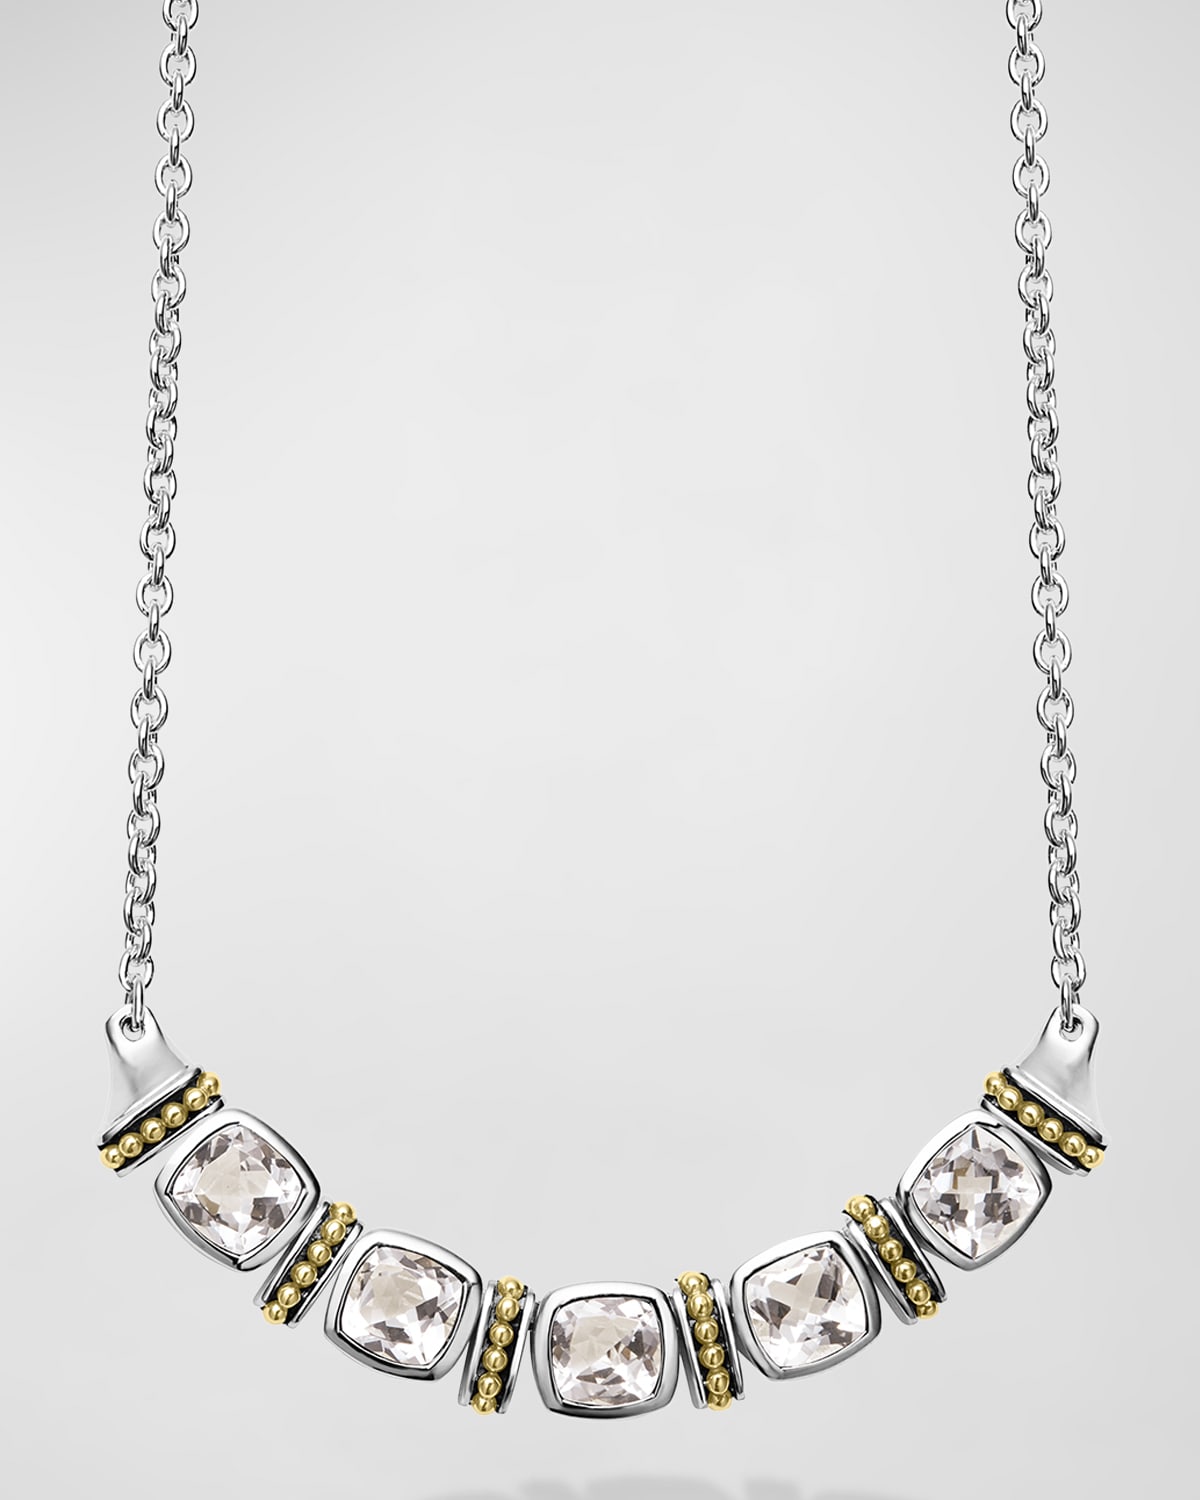 LAGOS CAVIAR WHITE TOPAZ 5-STATION NECKLACE IN STERLING SILVER